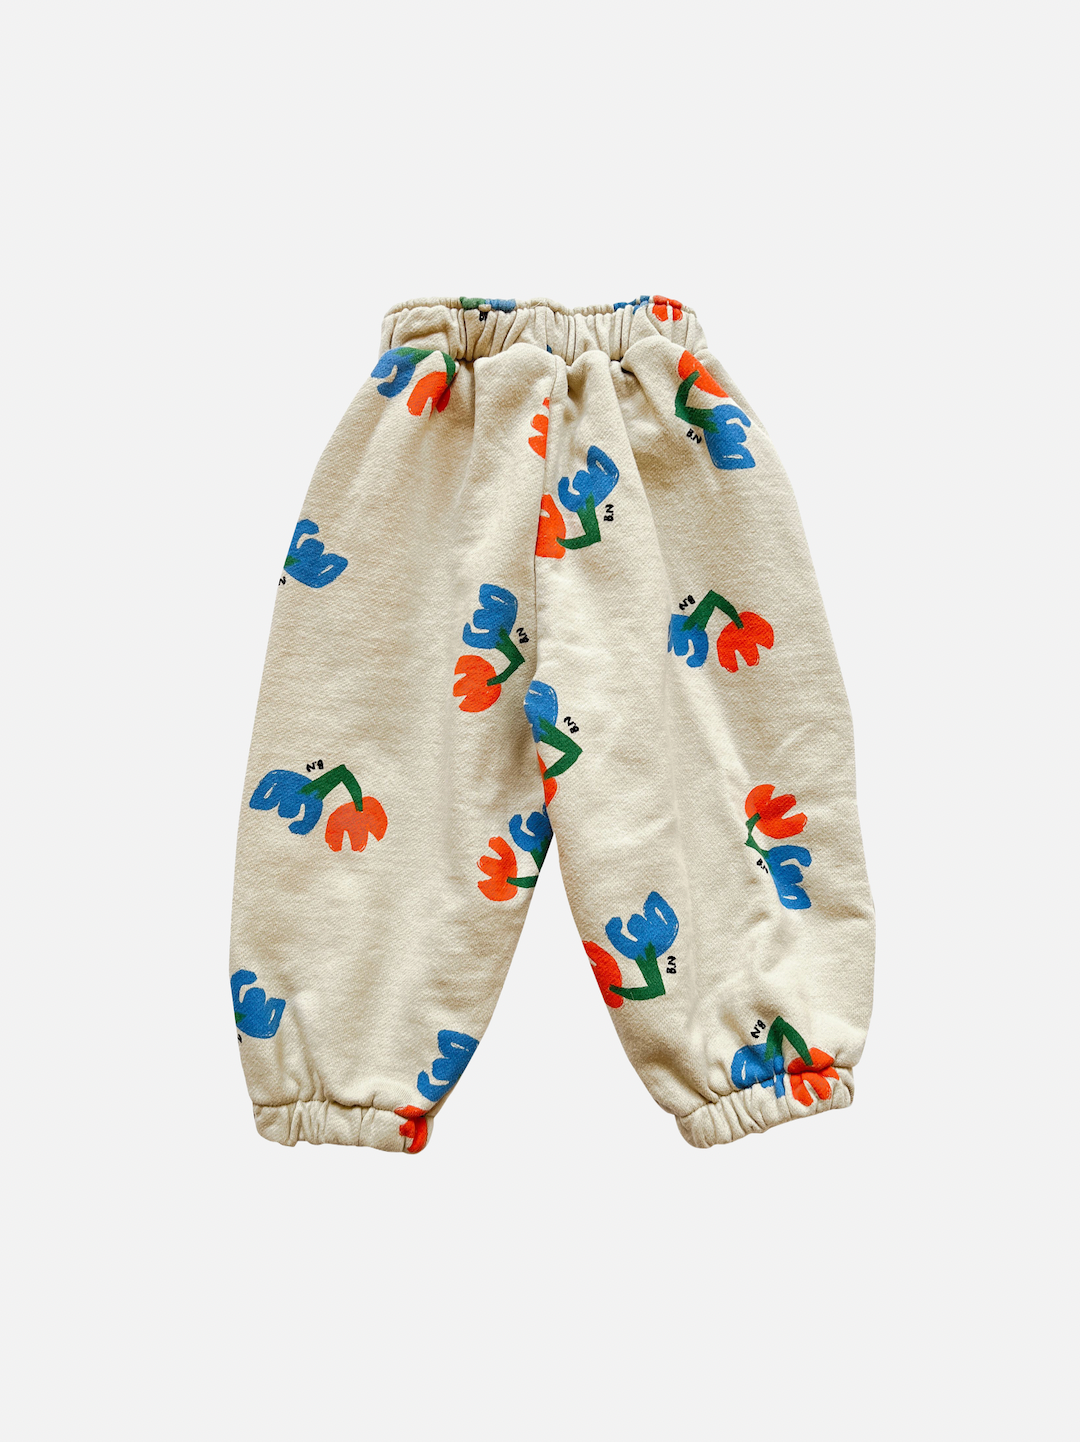 Pair of kids' sweatpants with blue and red flowers on an ecru background, back view